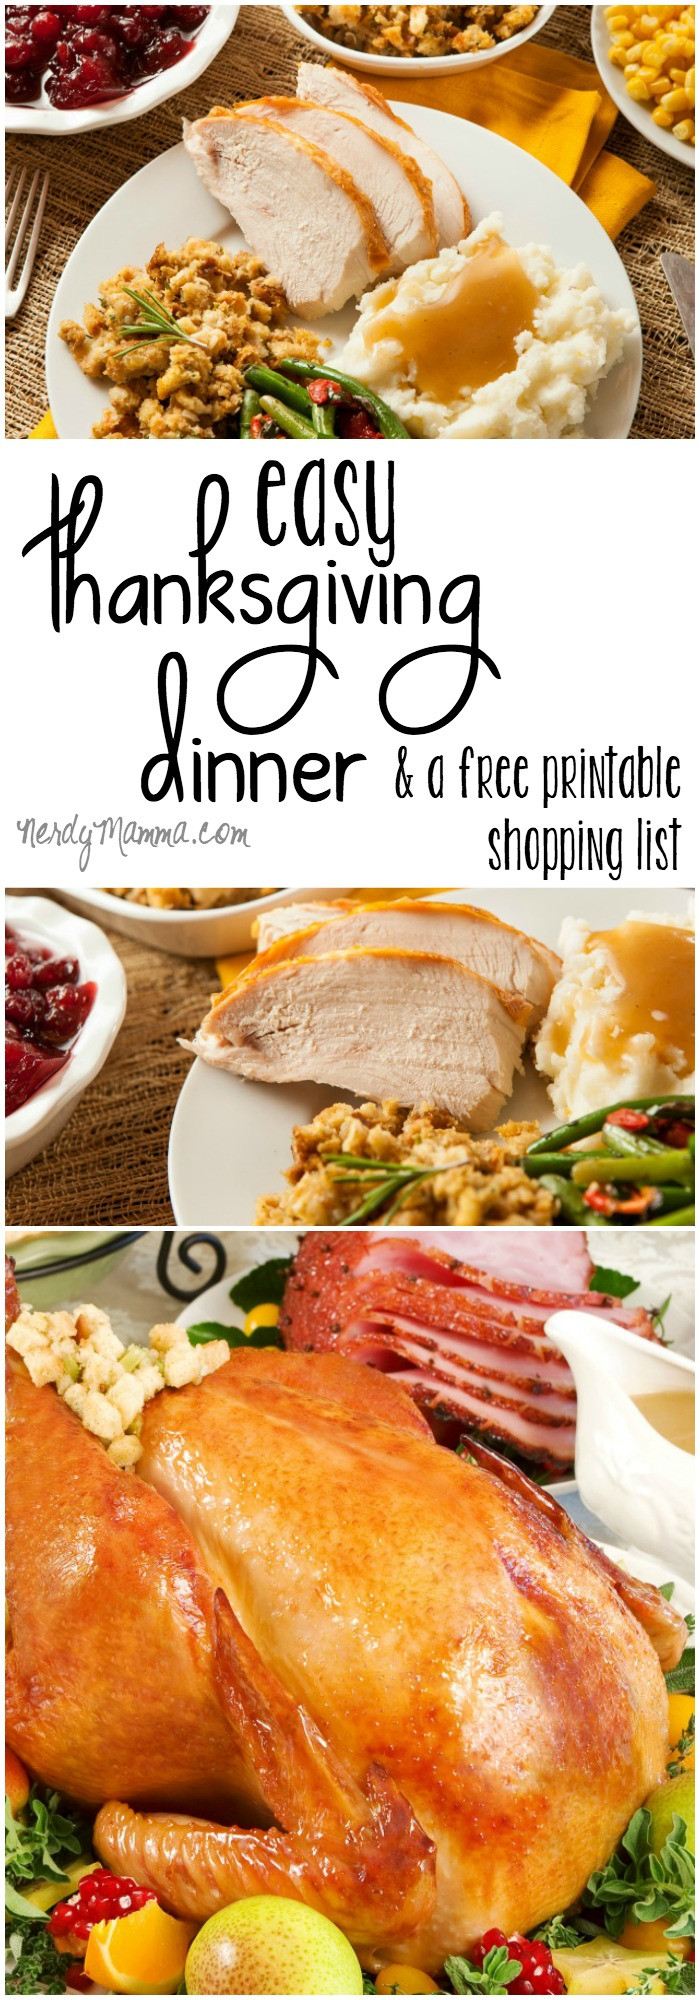 Simple Thanksgiving Dinners
 Easy Thanksgiving Dinner and Shopping List